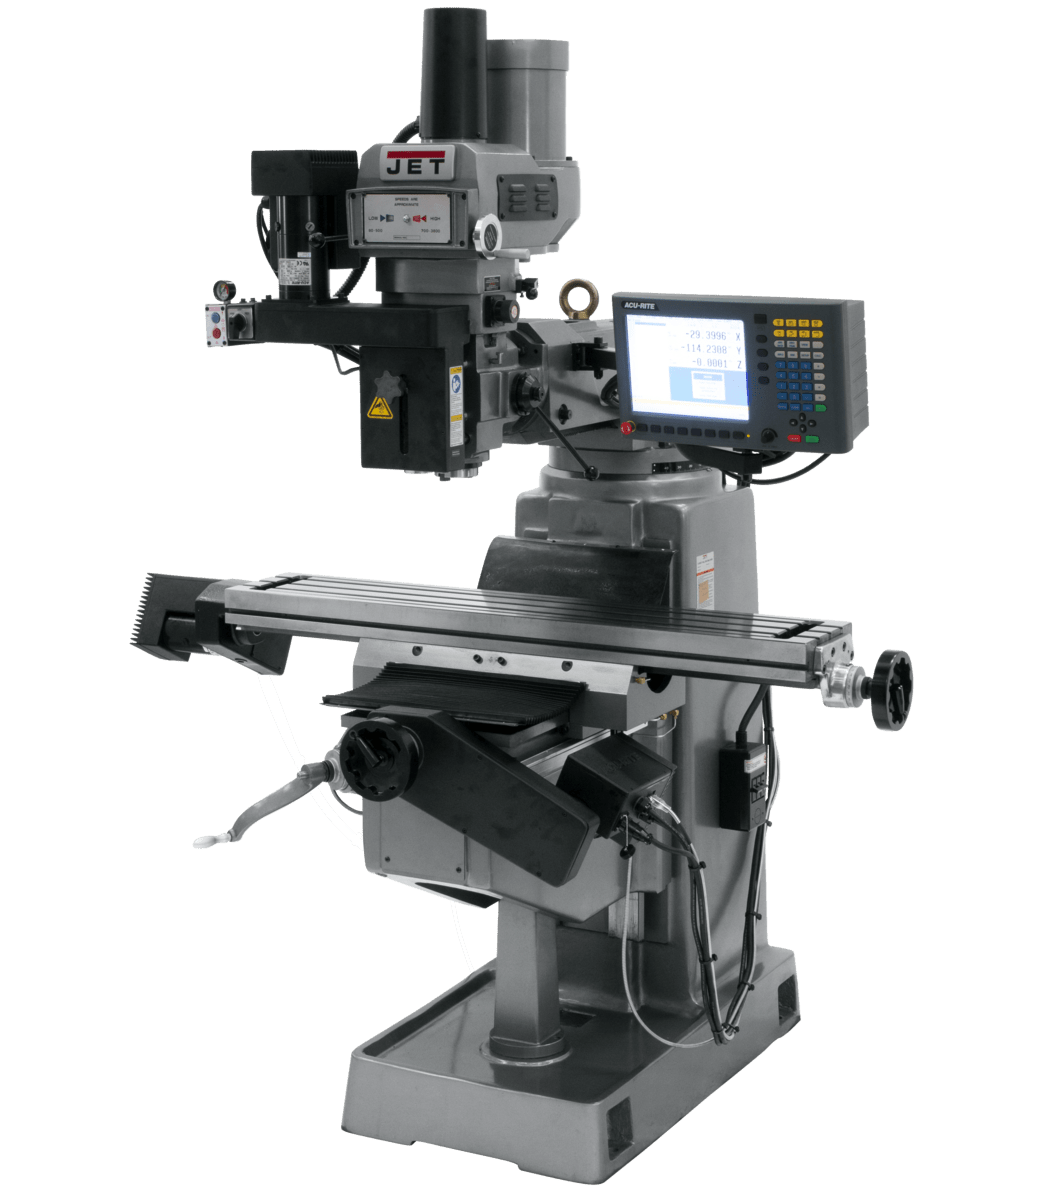 JTM-949EVS/230 Mill With 3-Axis ACU-RITE G-2 MILLPWR CNC - Jet